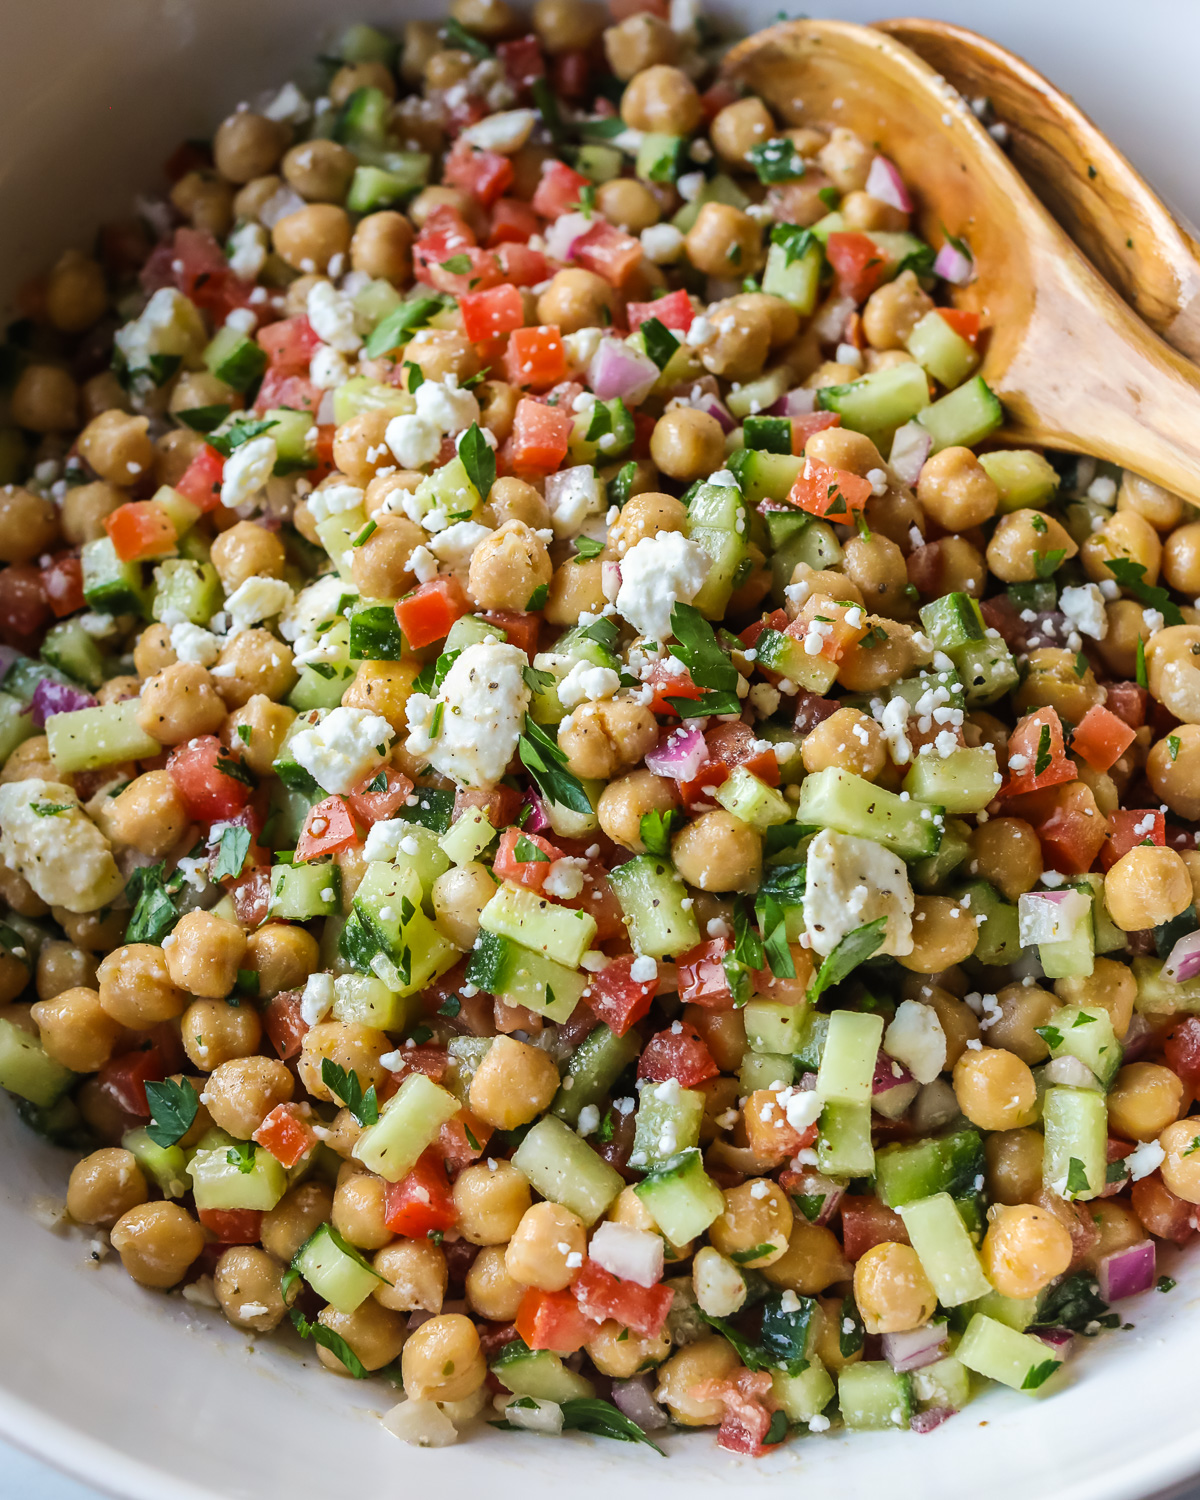 Chickpea salad ready to eat. 